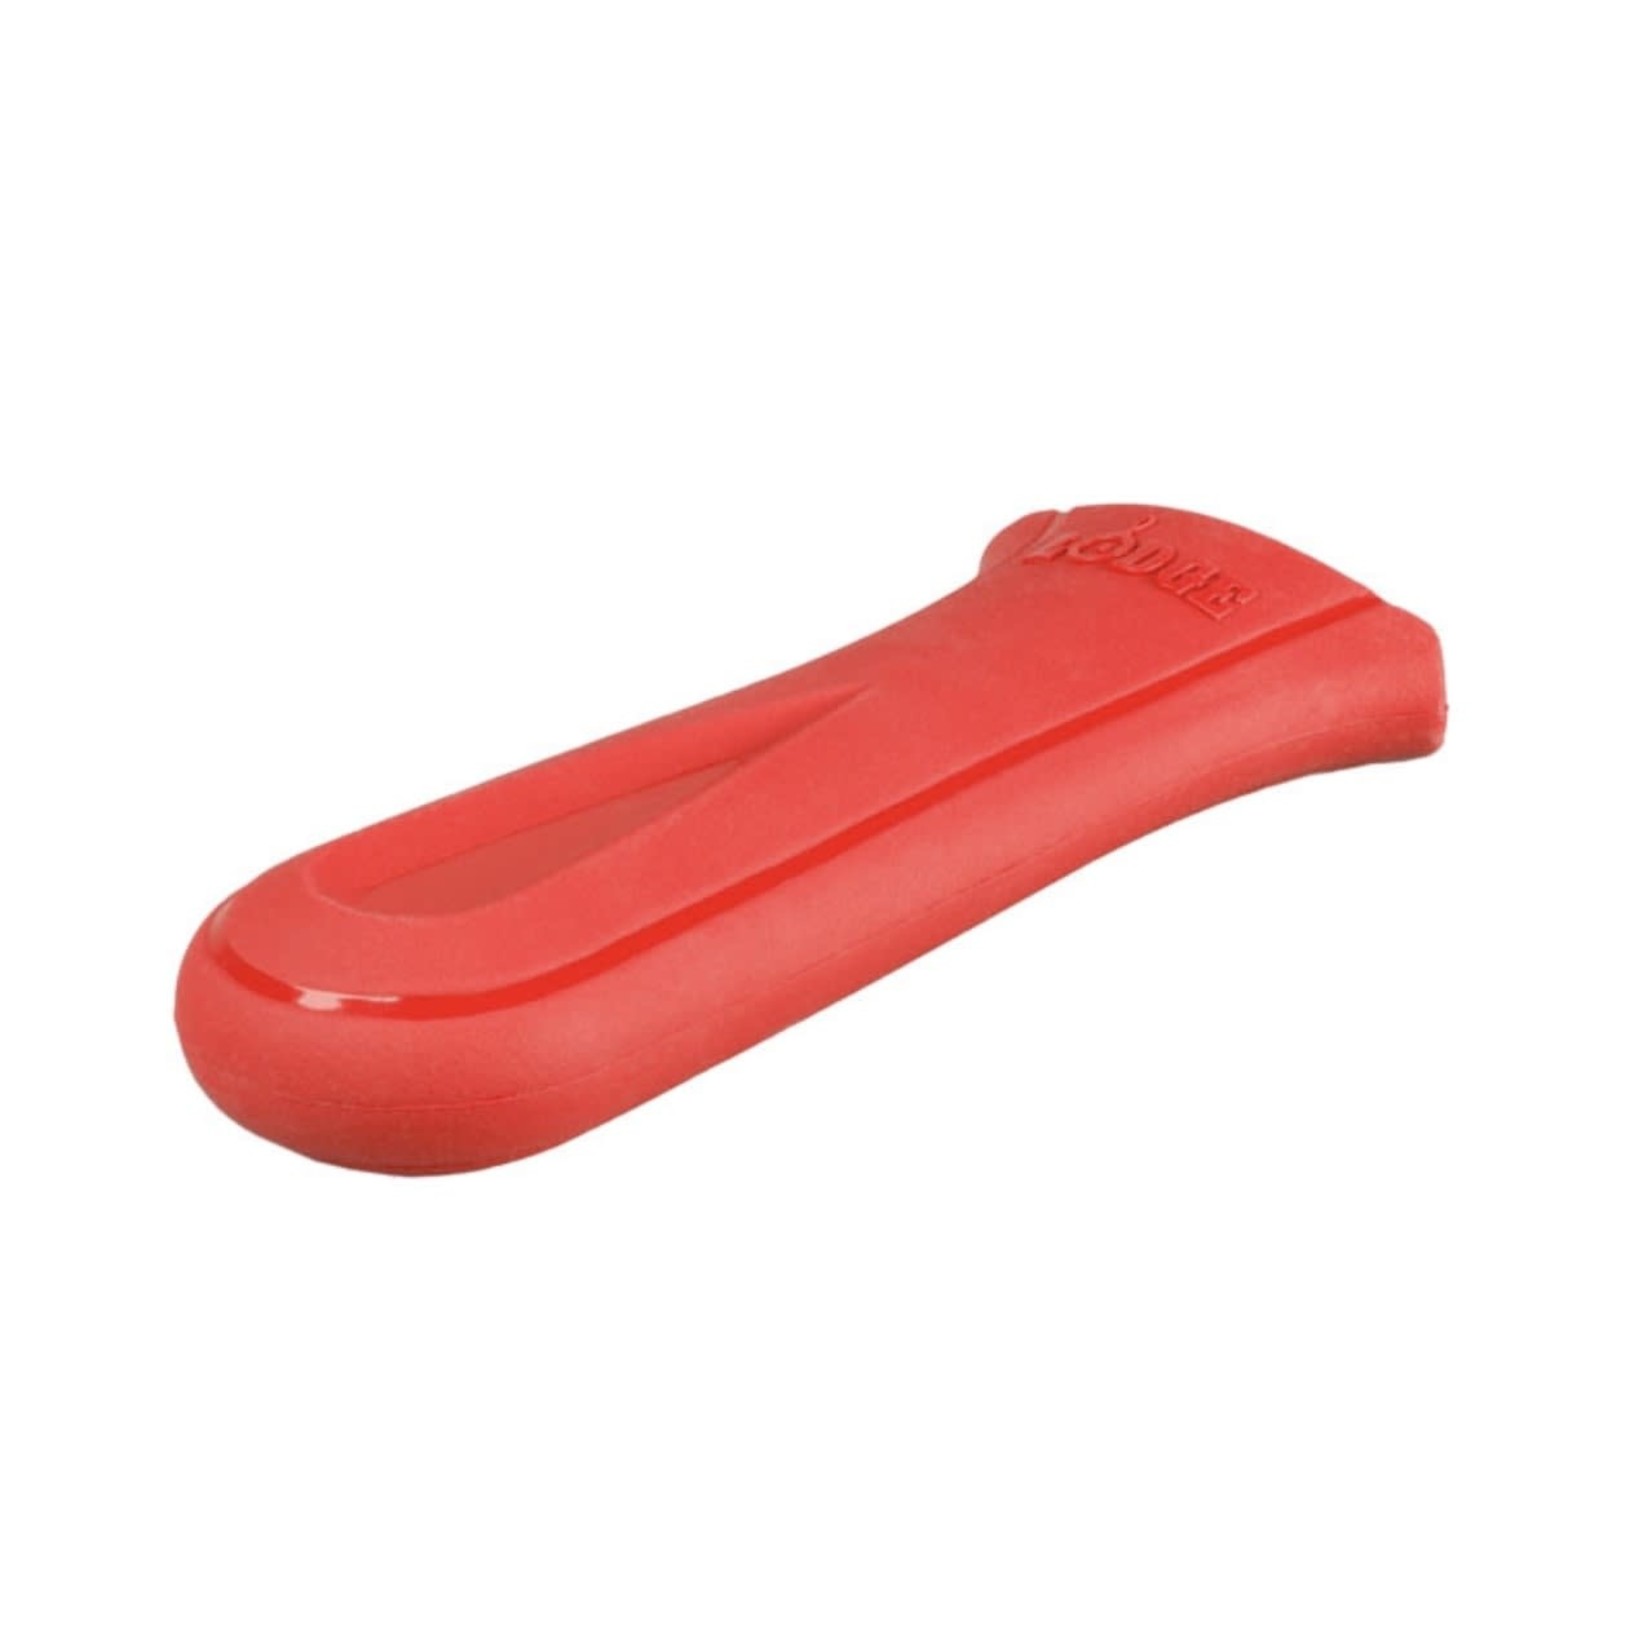 LODGE LODGE Deluxe Silicone Handle Holder - Red